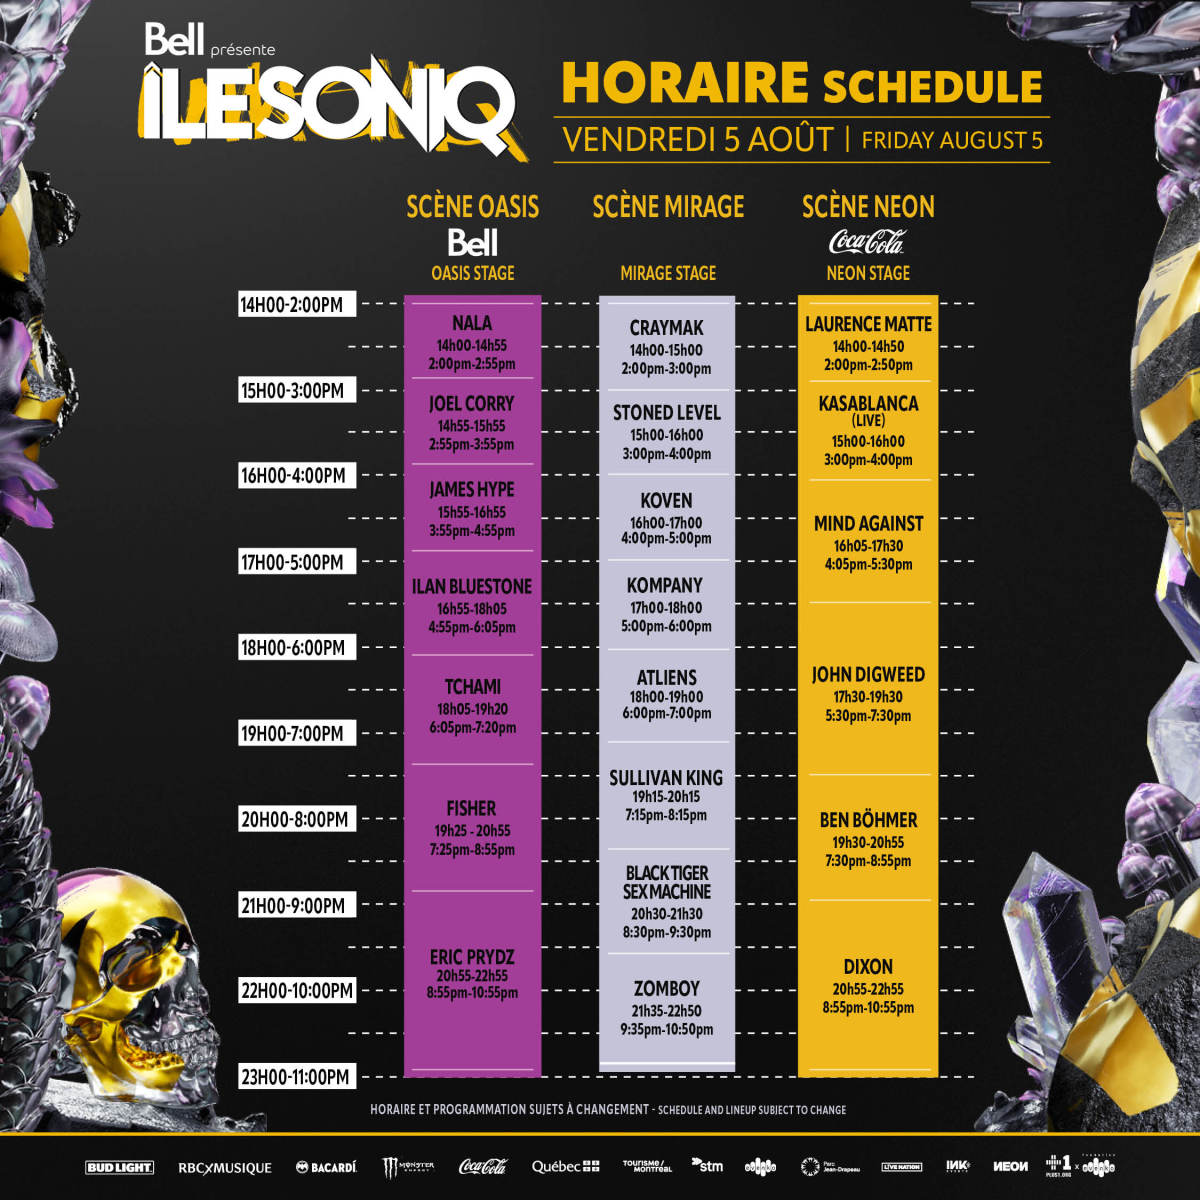 Schedule for August 5th, Day 1 of ÎLESONIQ 2022.